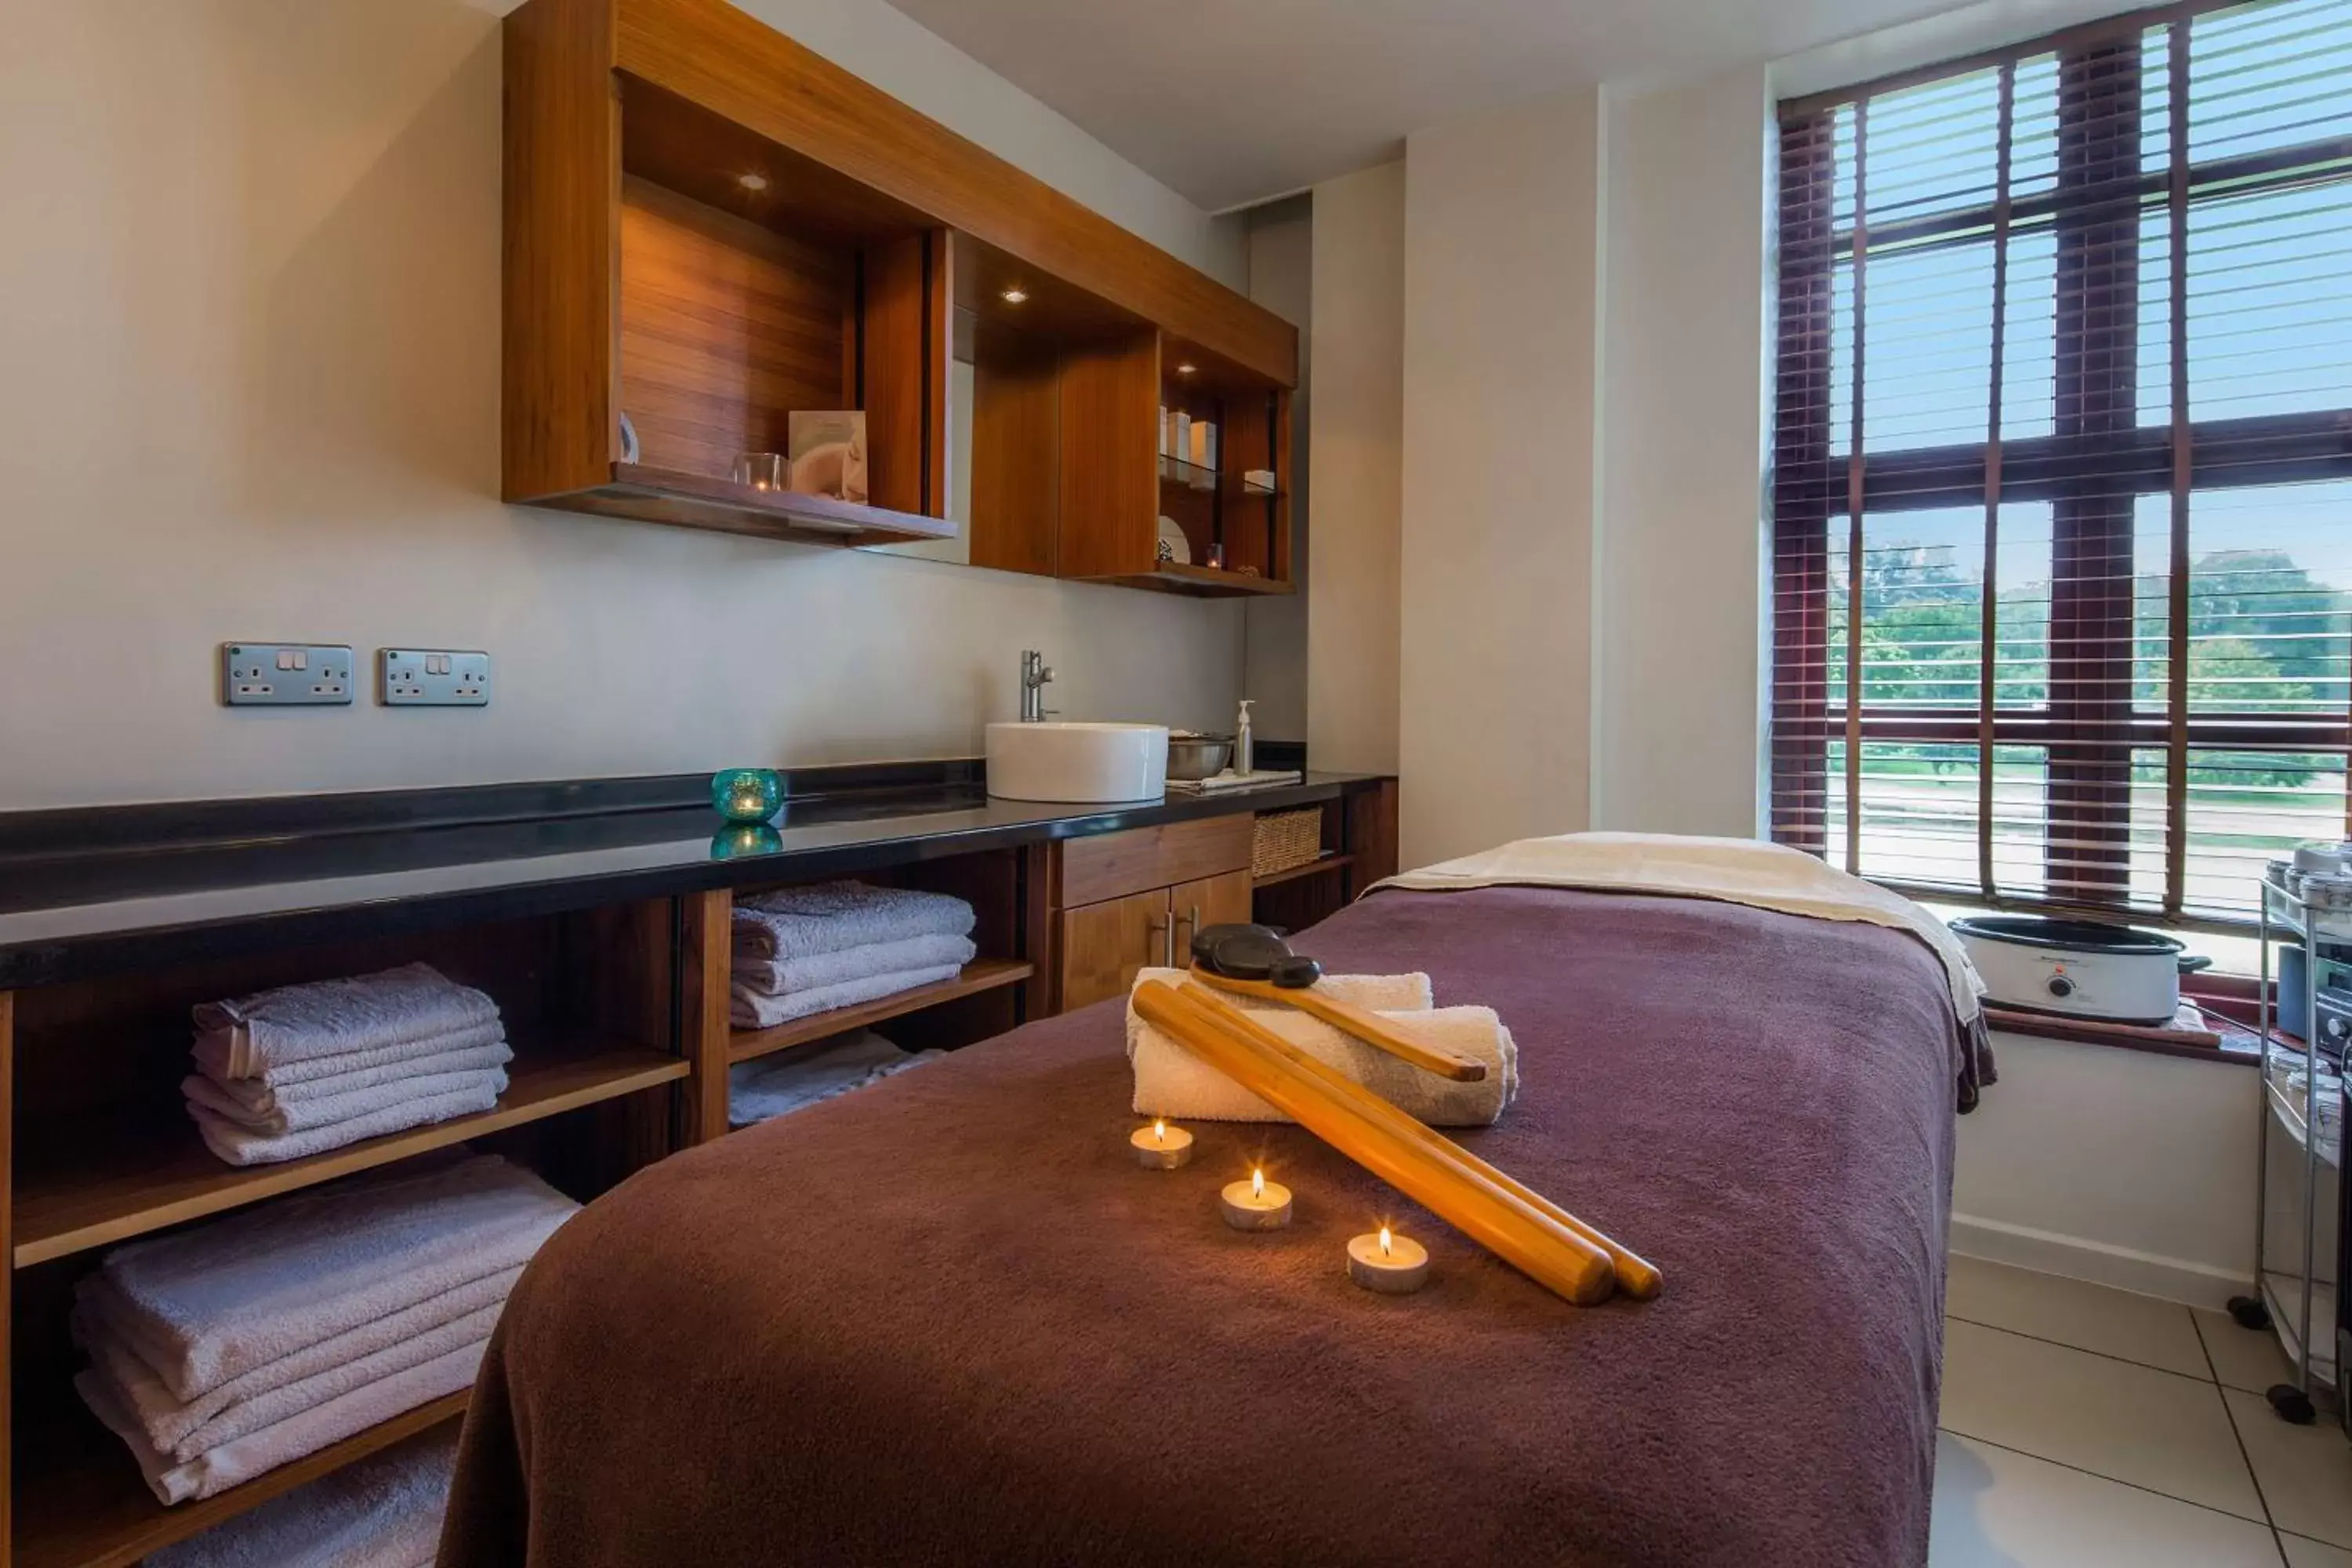 Spa and wellness centre/facilities in Hilton Puckrup Hall, Tewkesbury